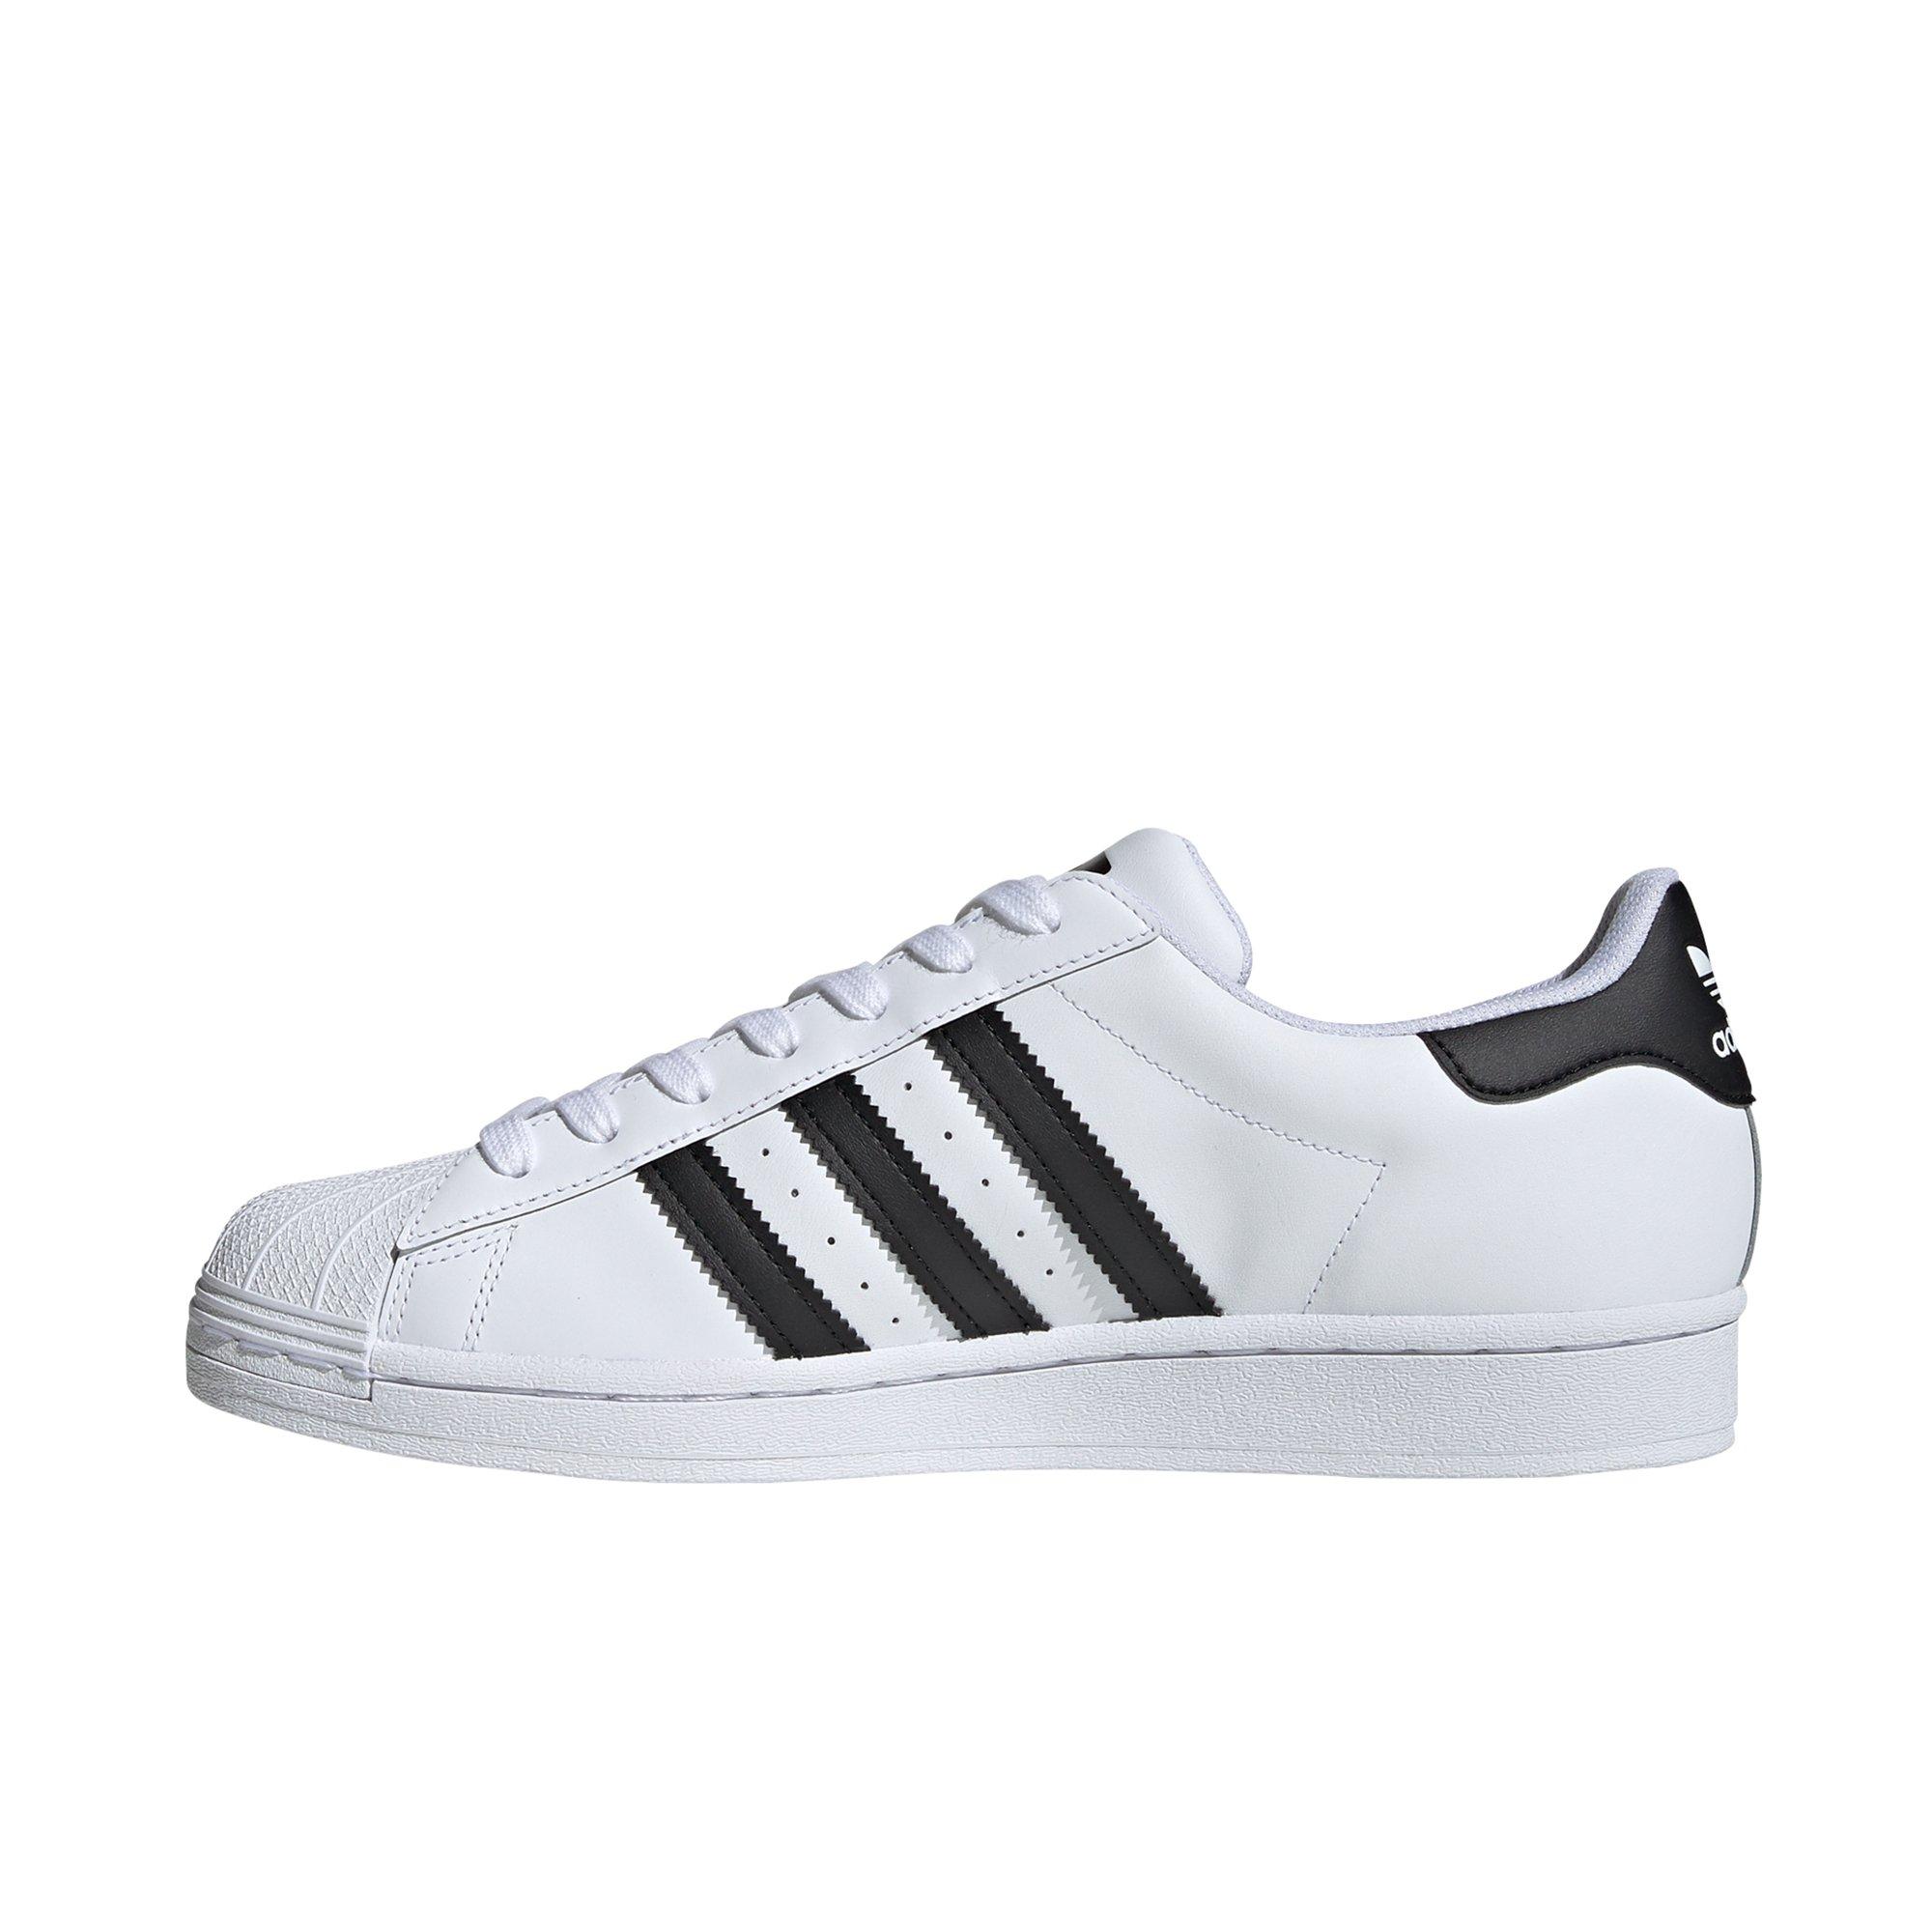 adidas shoes online lowest price